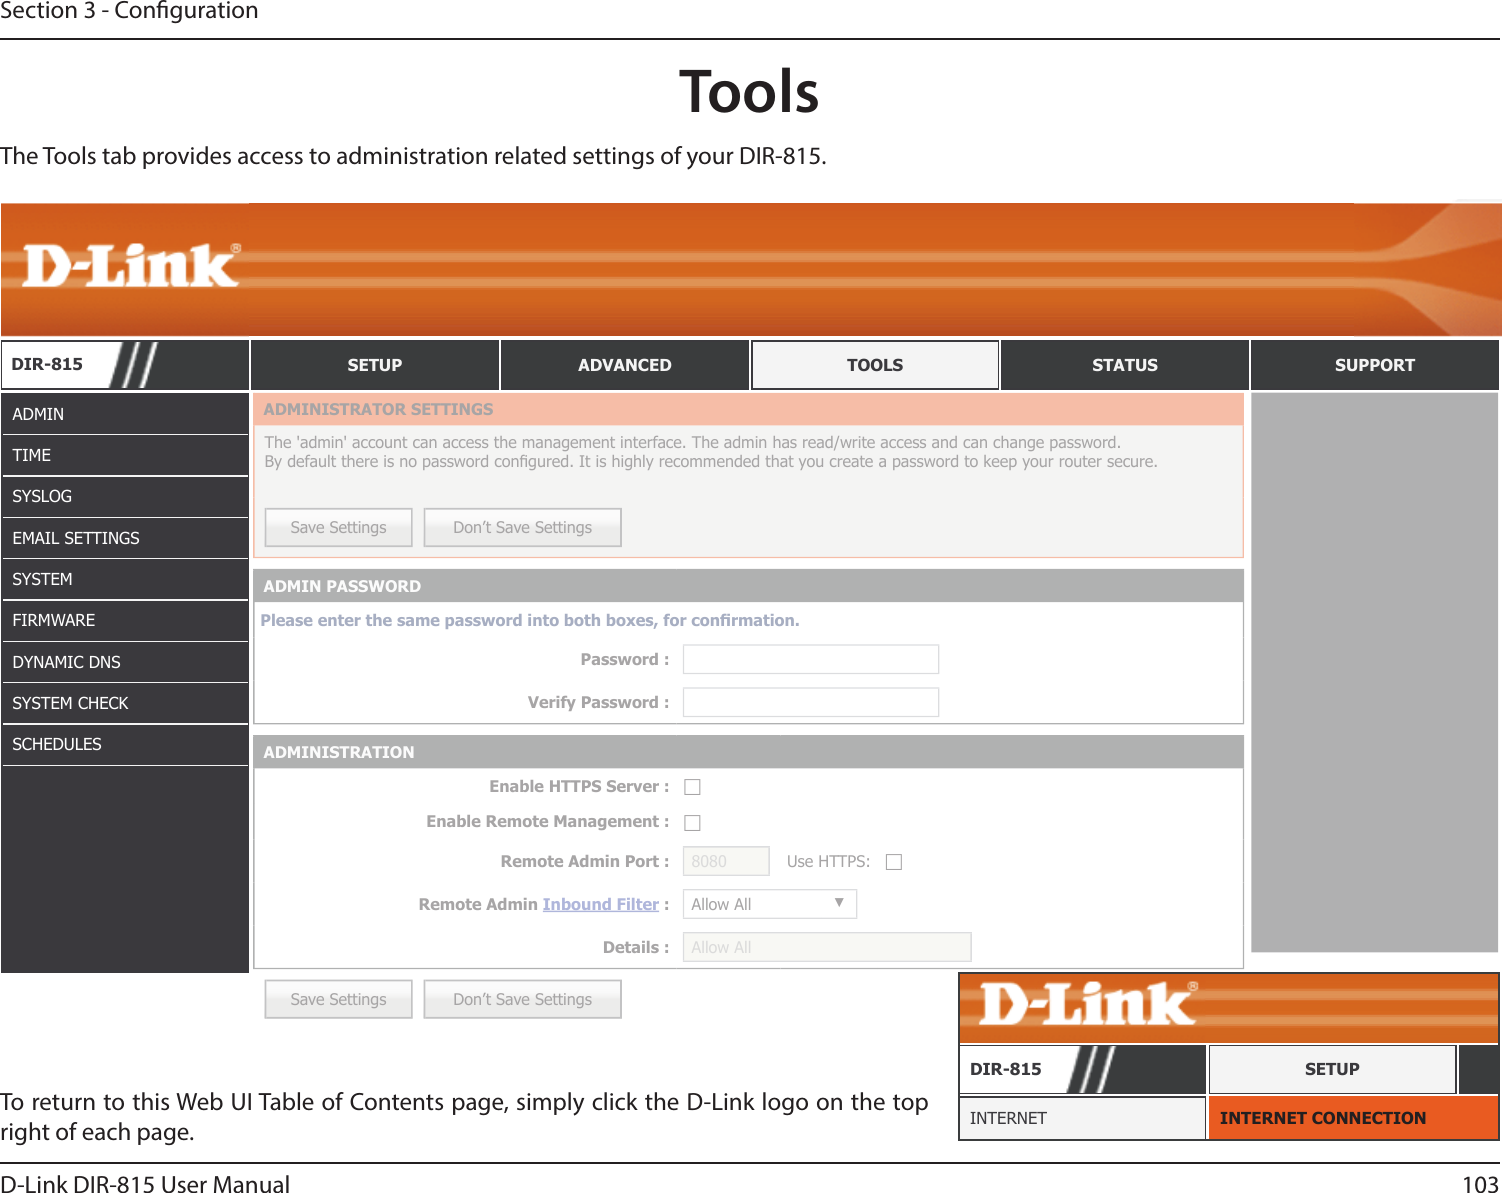 103D-Link DIR-815 User ManualSection 3 - CongurationToolsADMINTIMESYSLOGEMAIL SETTINGSSYSTEMFIRMWAREDYNAMIC DNSSYSTEM CHECKSCHEDULESTo return to this Web UI Table of Contents page, simply click the D-Link logo on the top right of each page. INTERNET CONNECTIONINTERNETDIR-815 SETUPThe Tools tab provides access to administration related settings of your DIR-815.DIR-815 SETUP ADVANCED TOOLS STATUS SUPPORTSave Settings Don’t Save SettingsADMINISTRATOR SETTINGSThe &apos;admin&apos; account can access the management interface. The admin has read/write access and can change password. By default there is no password congured. It is highly recommended that you create a password to keep your router secure. Save Settings Don’t Save SettingsADMIN PASSWORDPlease enter the same password into both boxes, for conrmation.Password :Verify Password :ADMINISTRATIONEnable HTTPS Server : ☐Enable Remote Management : ☐Remote Admin Port : 8080 Use HTTPS: ☐Remote Admin Inbound Filter : Allow All ▼Details : Allow All